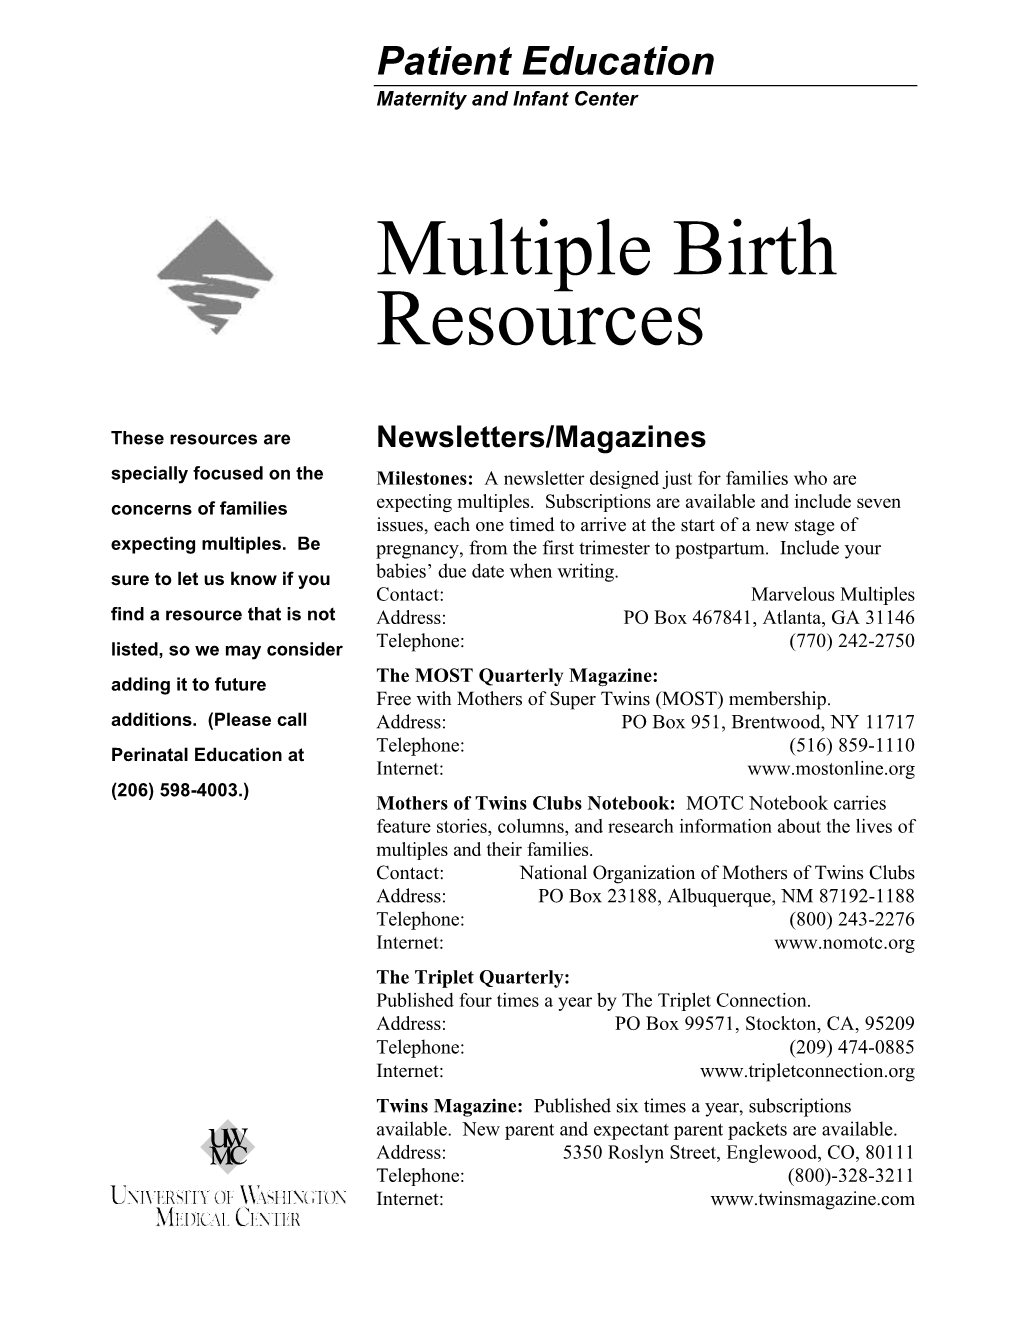 Multiple Birth Resources